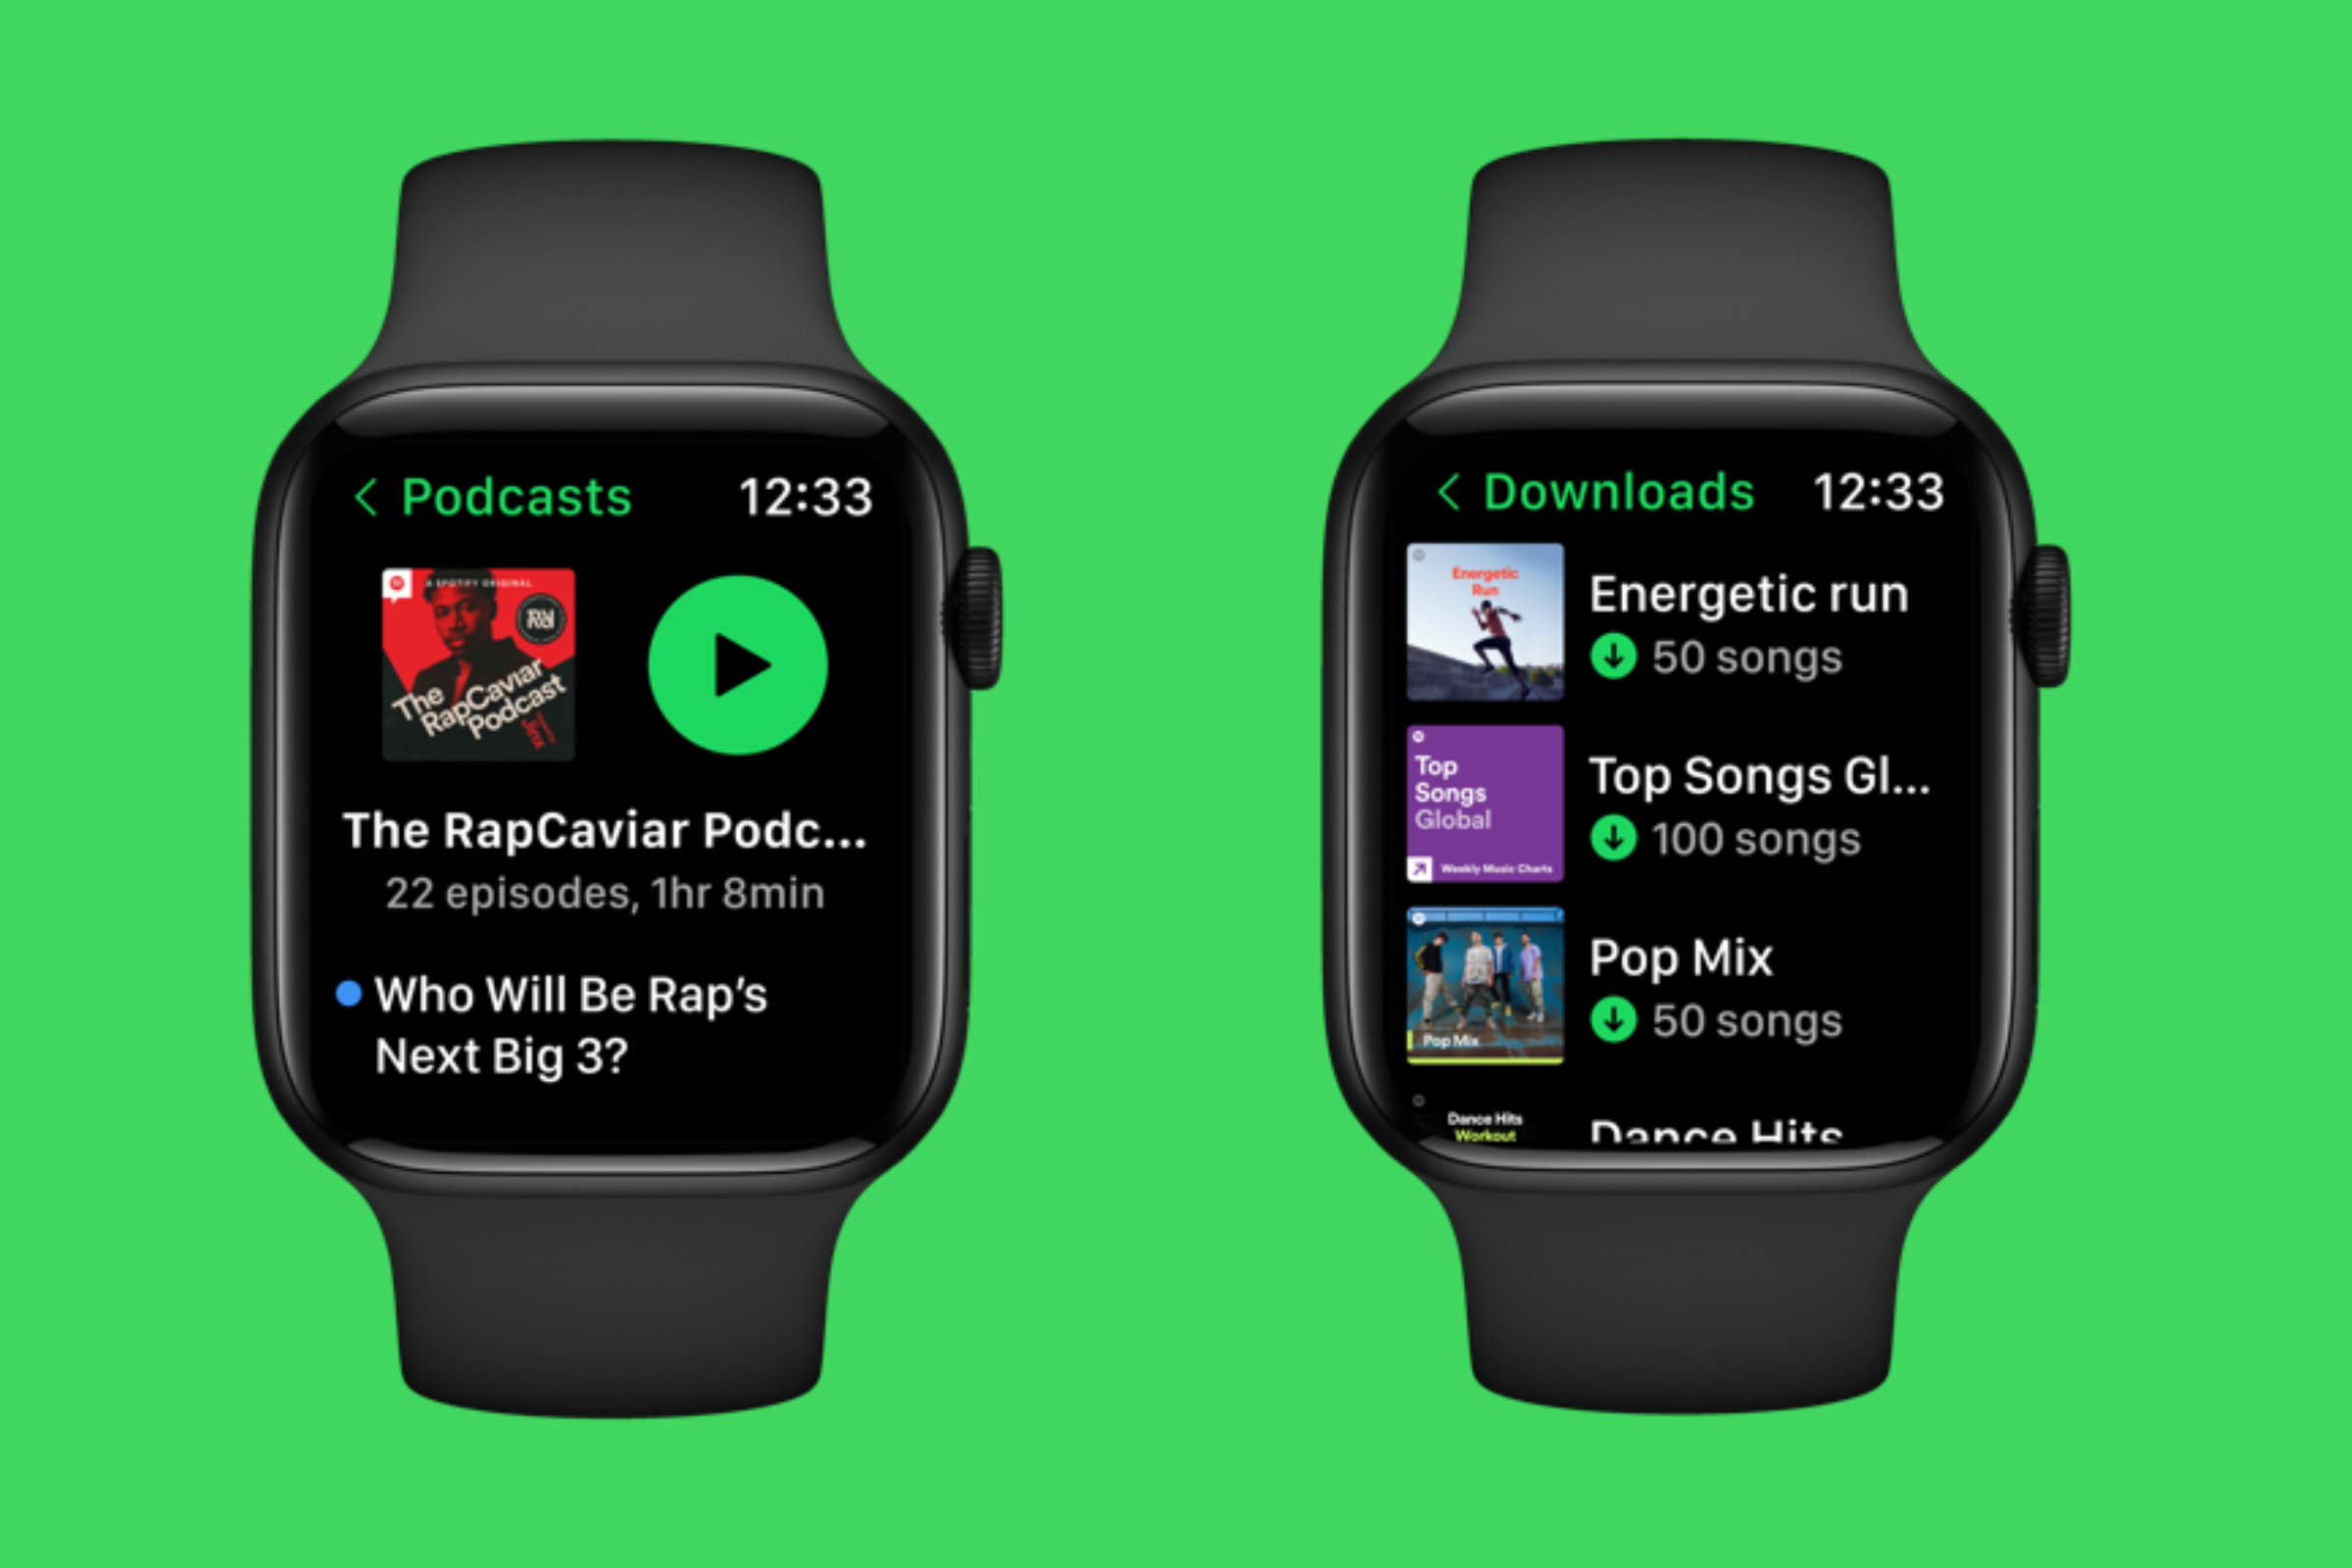 Spotify updated its app for the Apple Watch